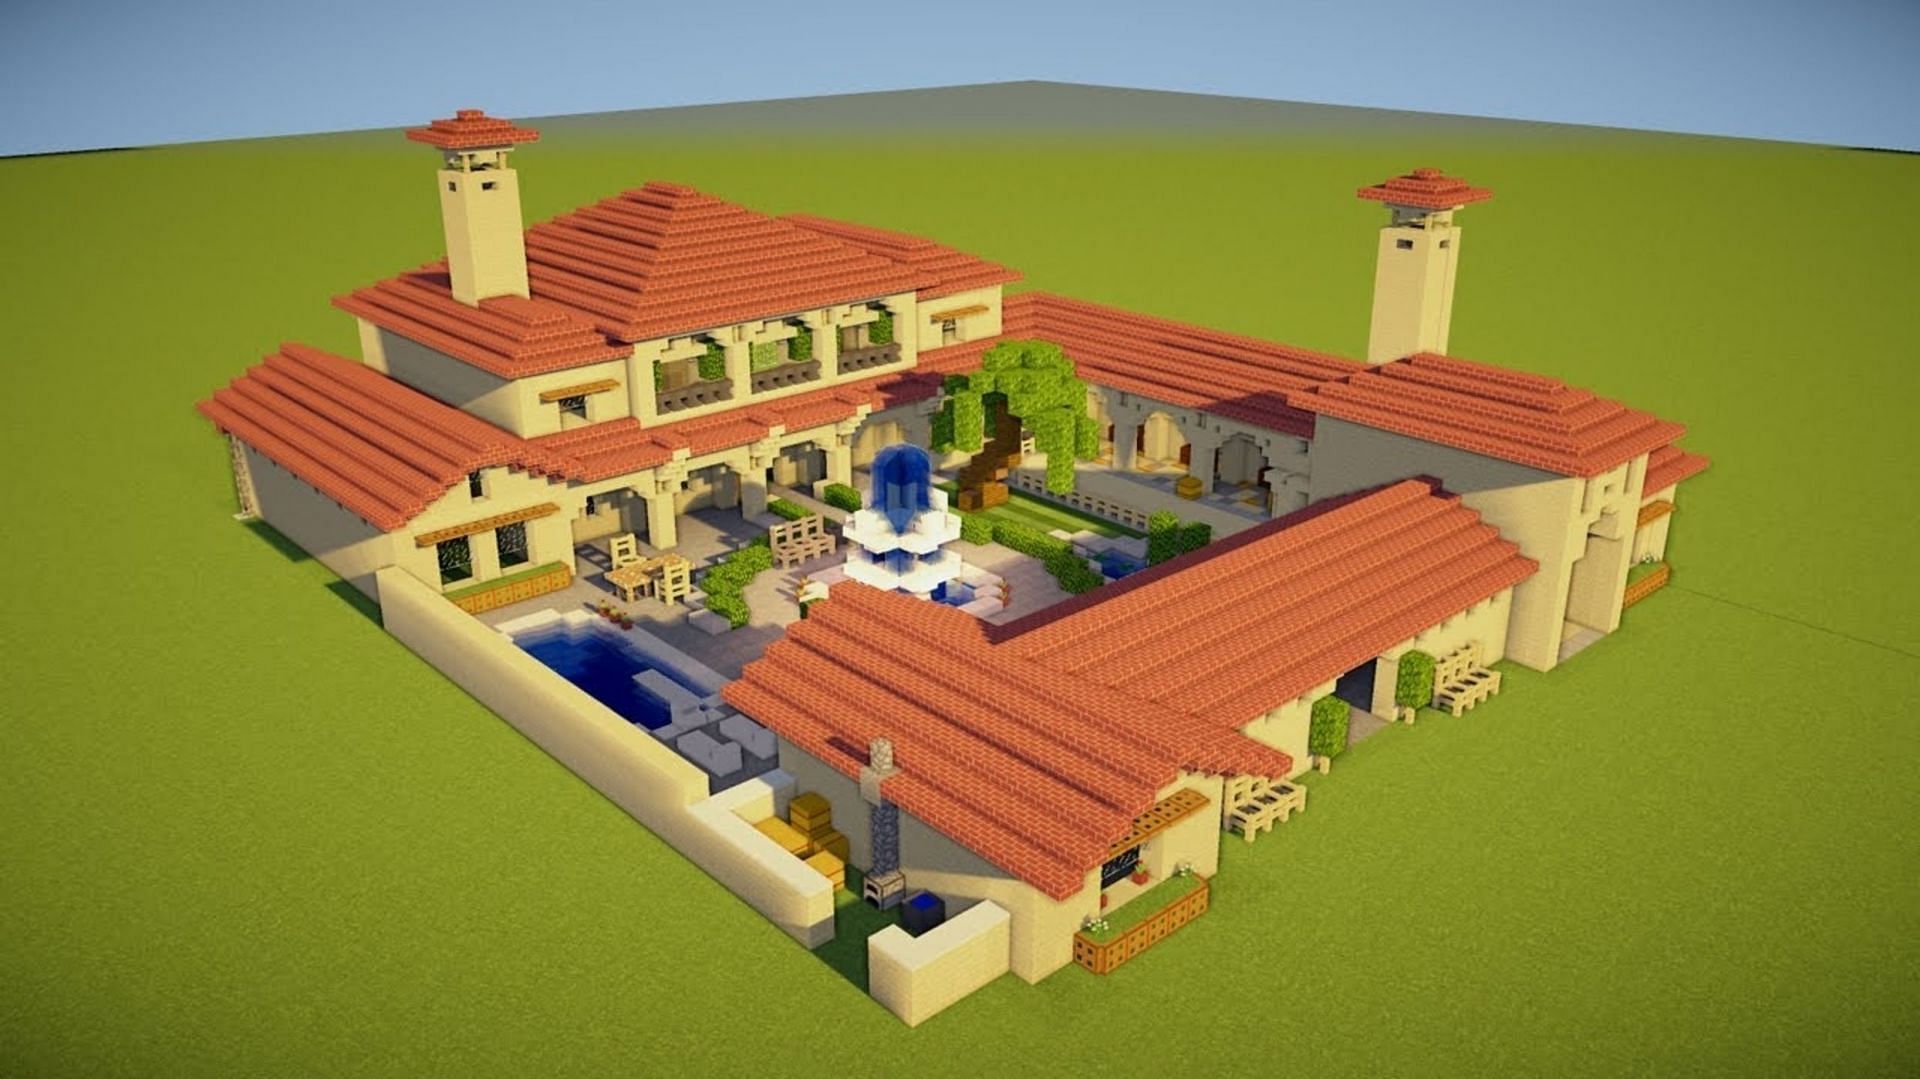 Many villas still exist today, so create your own in Minecraft (Image via A1MOSTADDICTED MINECRAFT/YouTube)